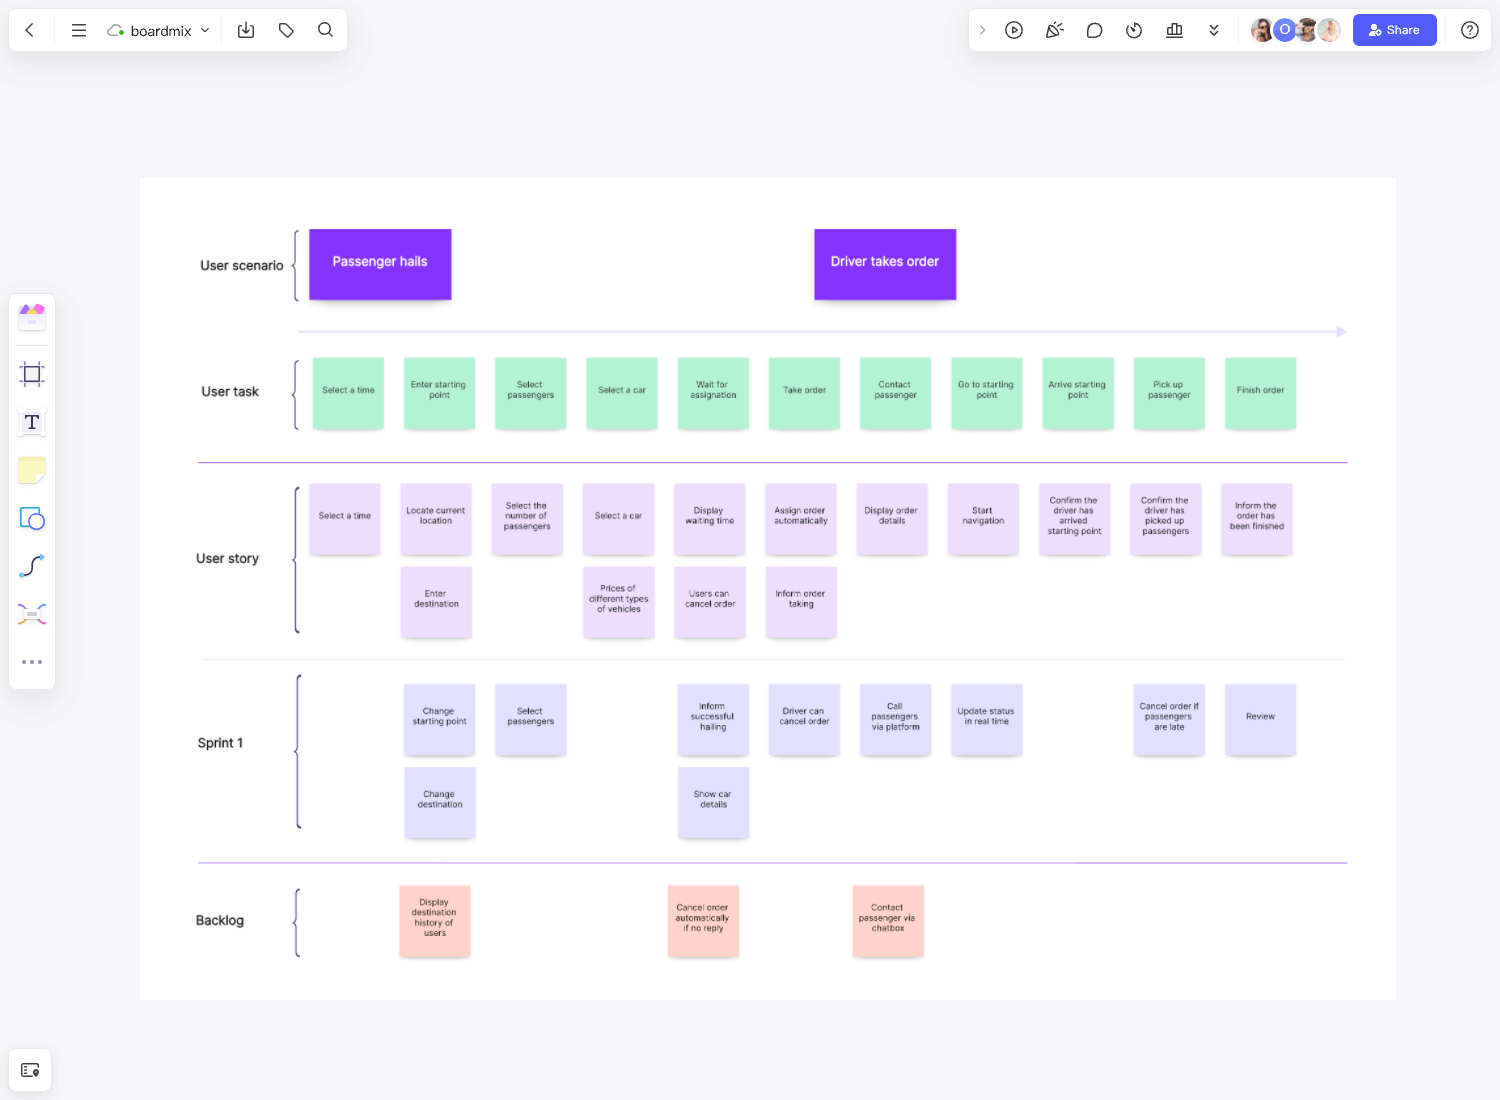 user story map